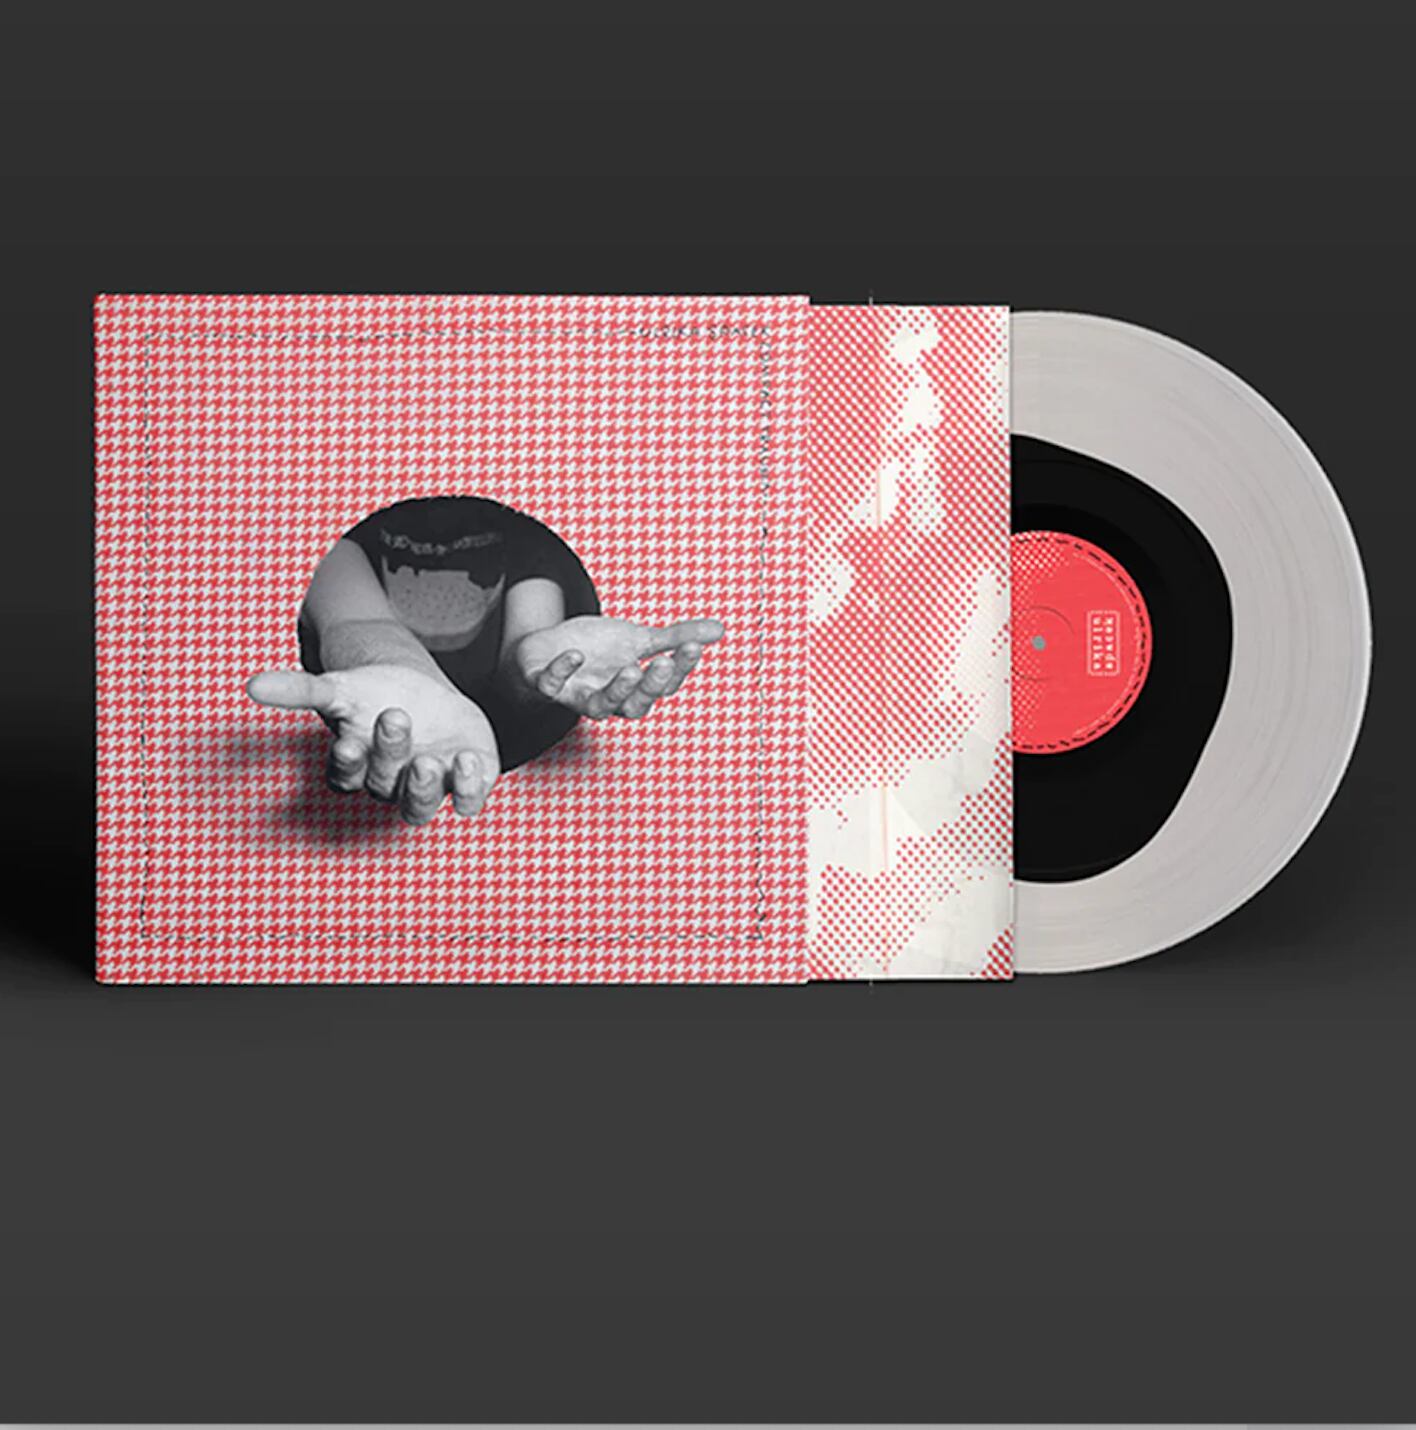 Ulrika Spacek / Compact Trauma（Ltd Frosted Clear LP）